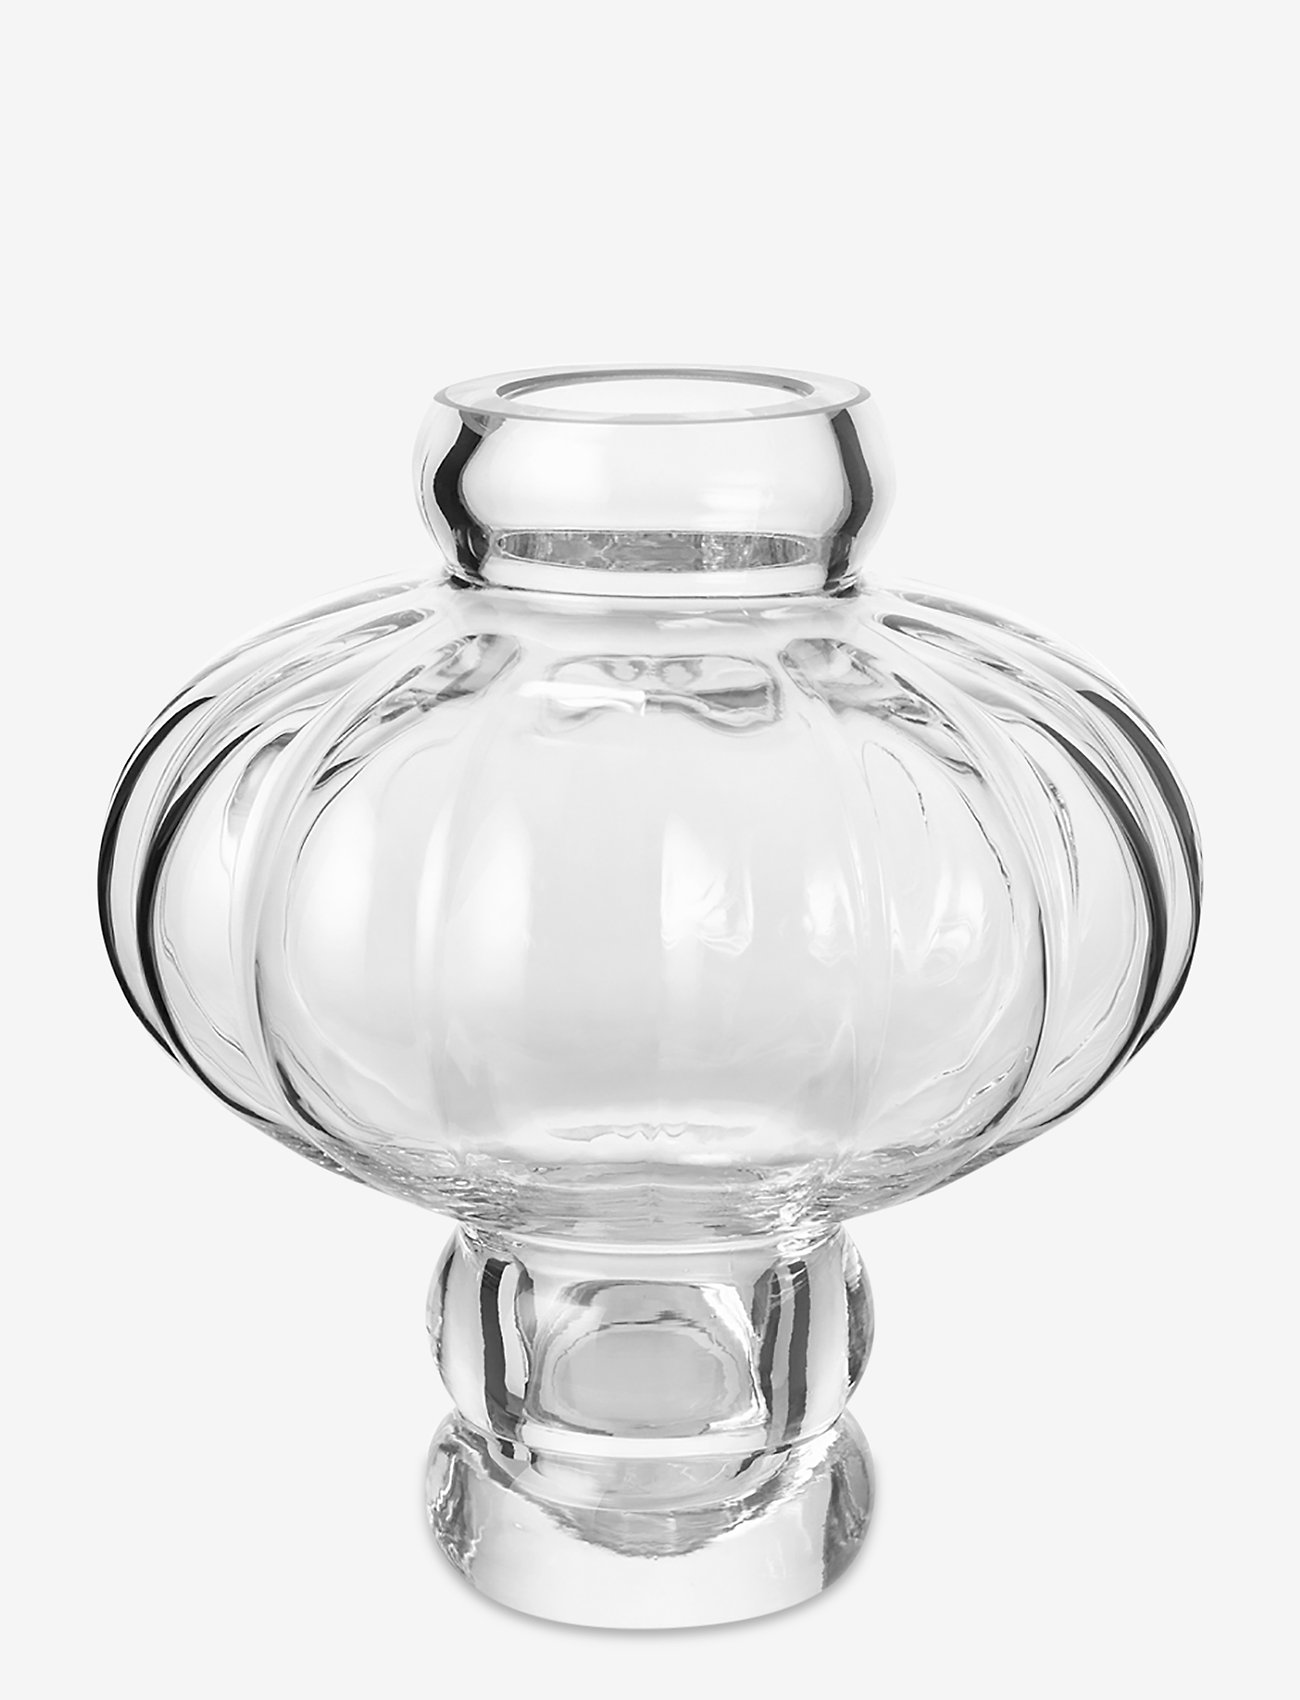 LOUISE ROE - Balloon Vase #02 - grote vazen - clear - 0